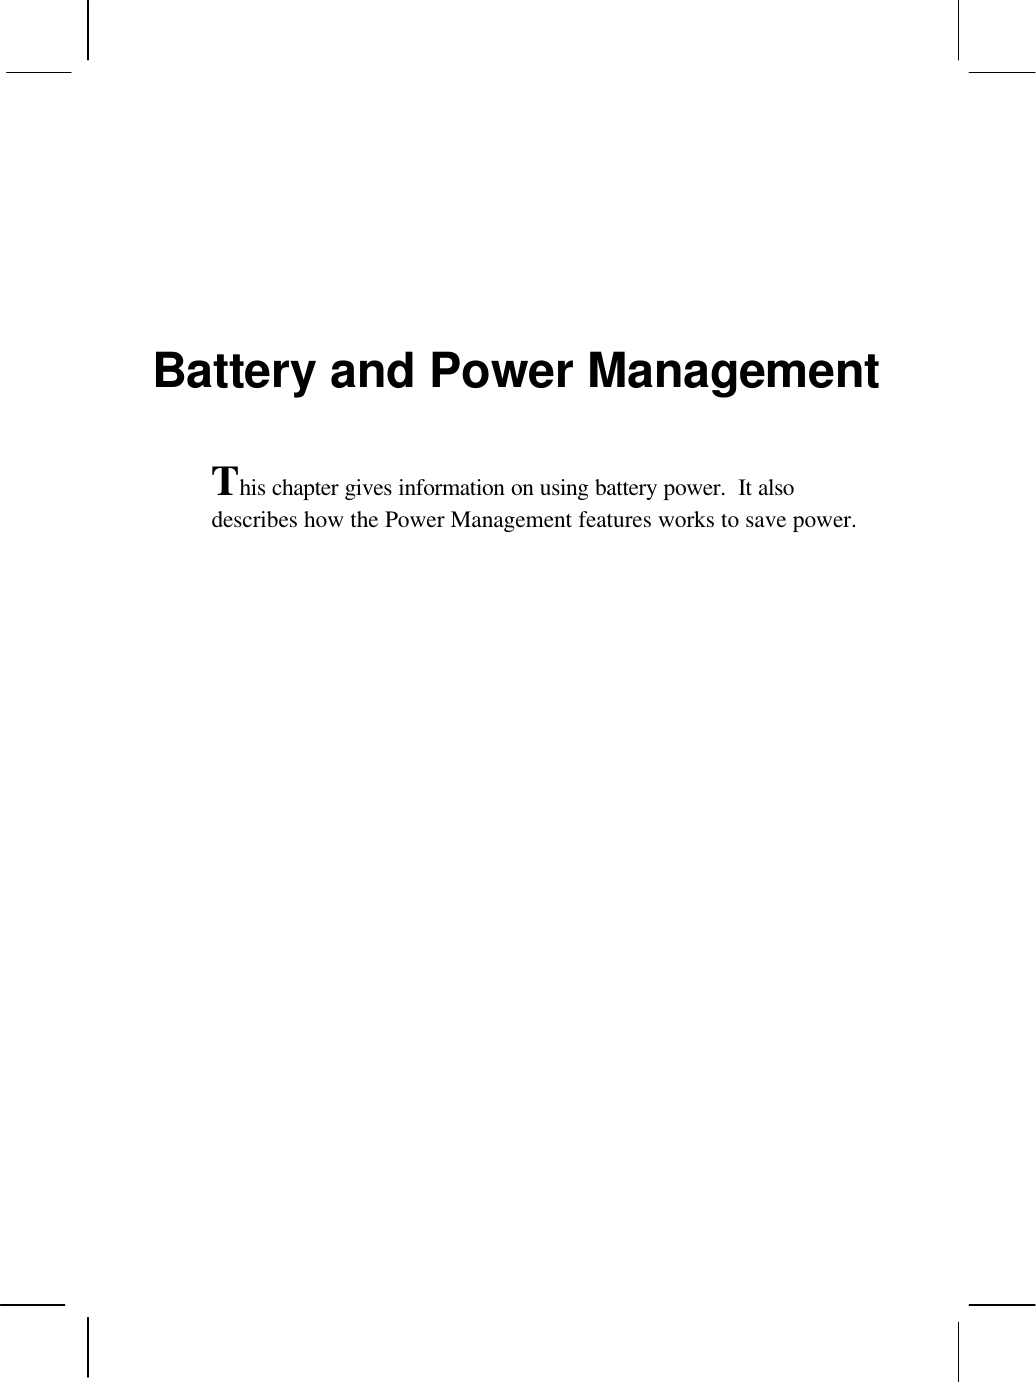 Battery and Power ManagementThis chapter gives information on using battery power.  It alsodescribes how the Power Management features works to save power.